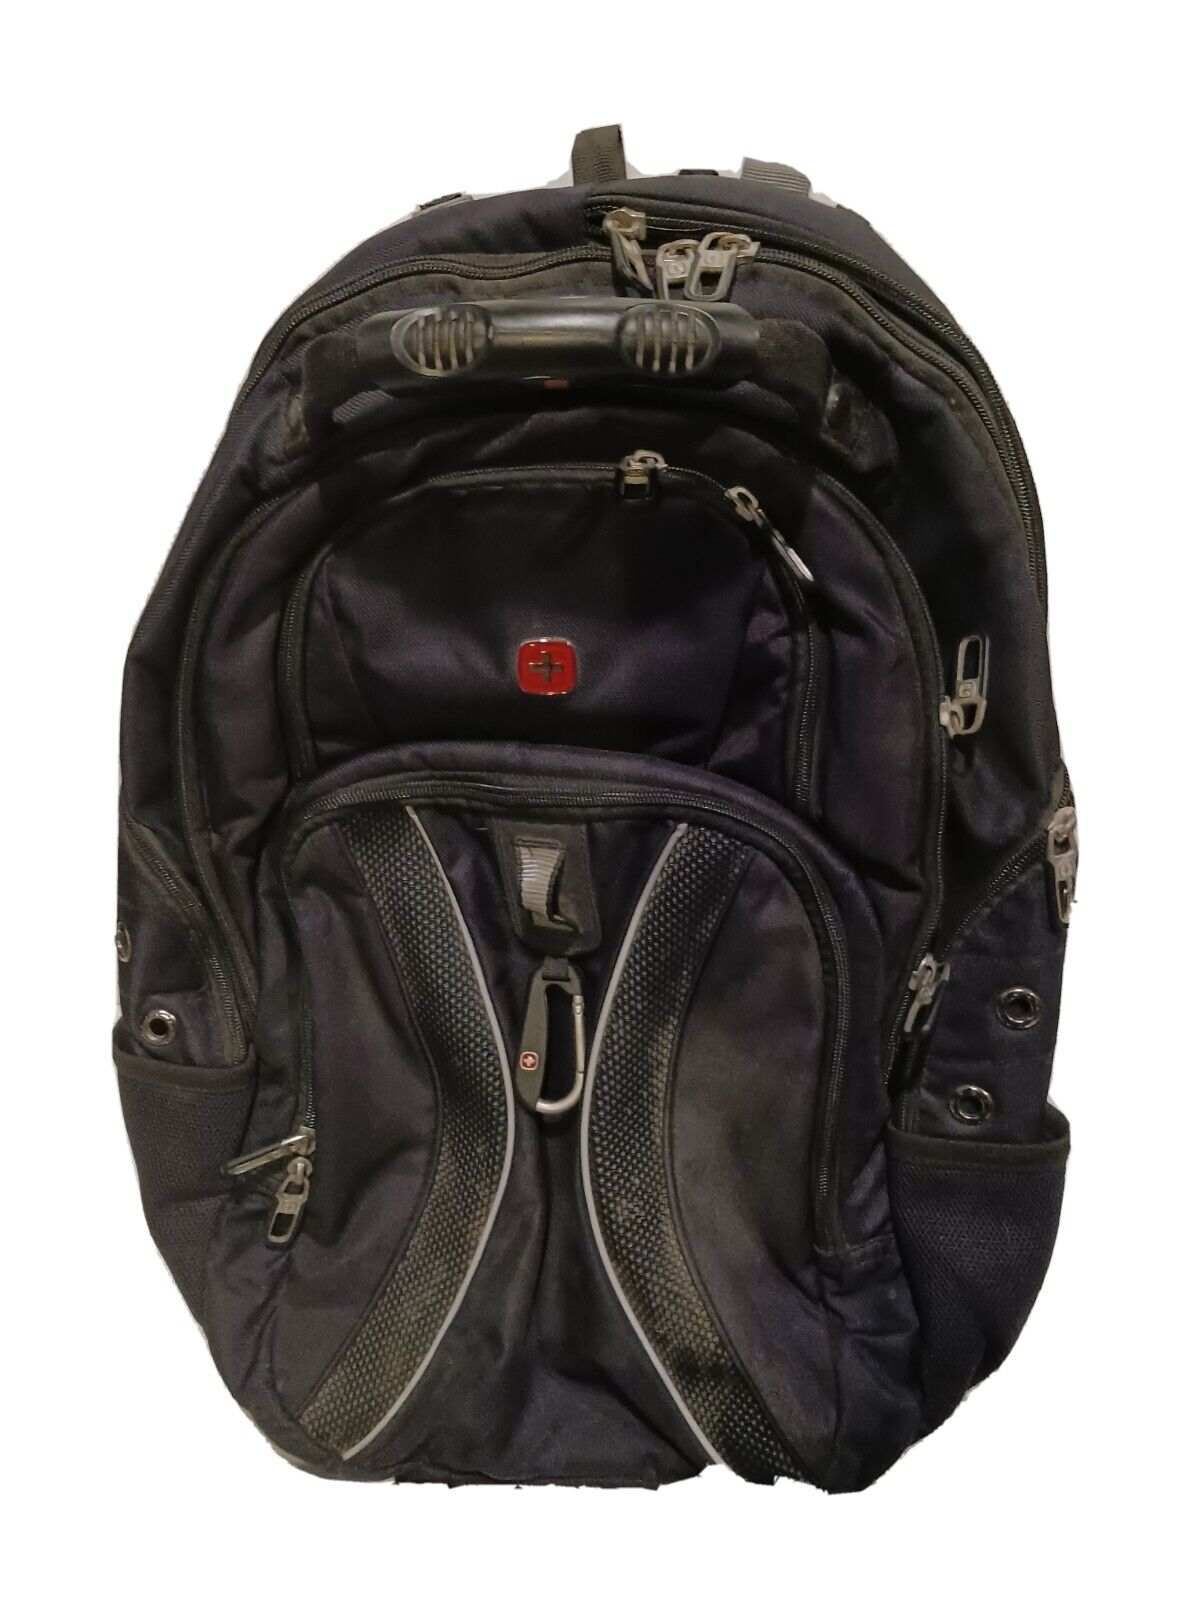 Swiss gear scan-smart Backpack With airflow Technology